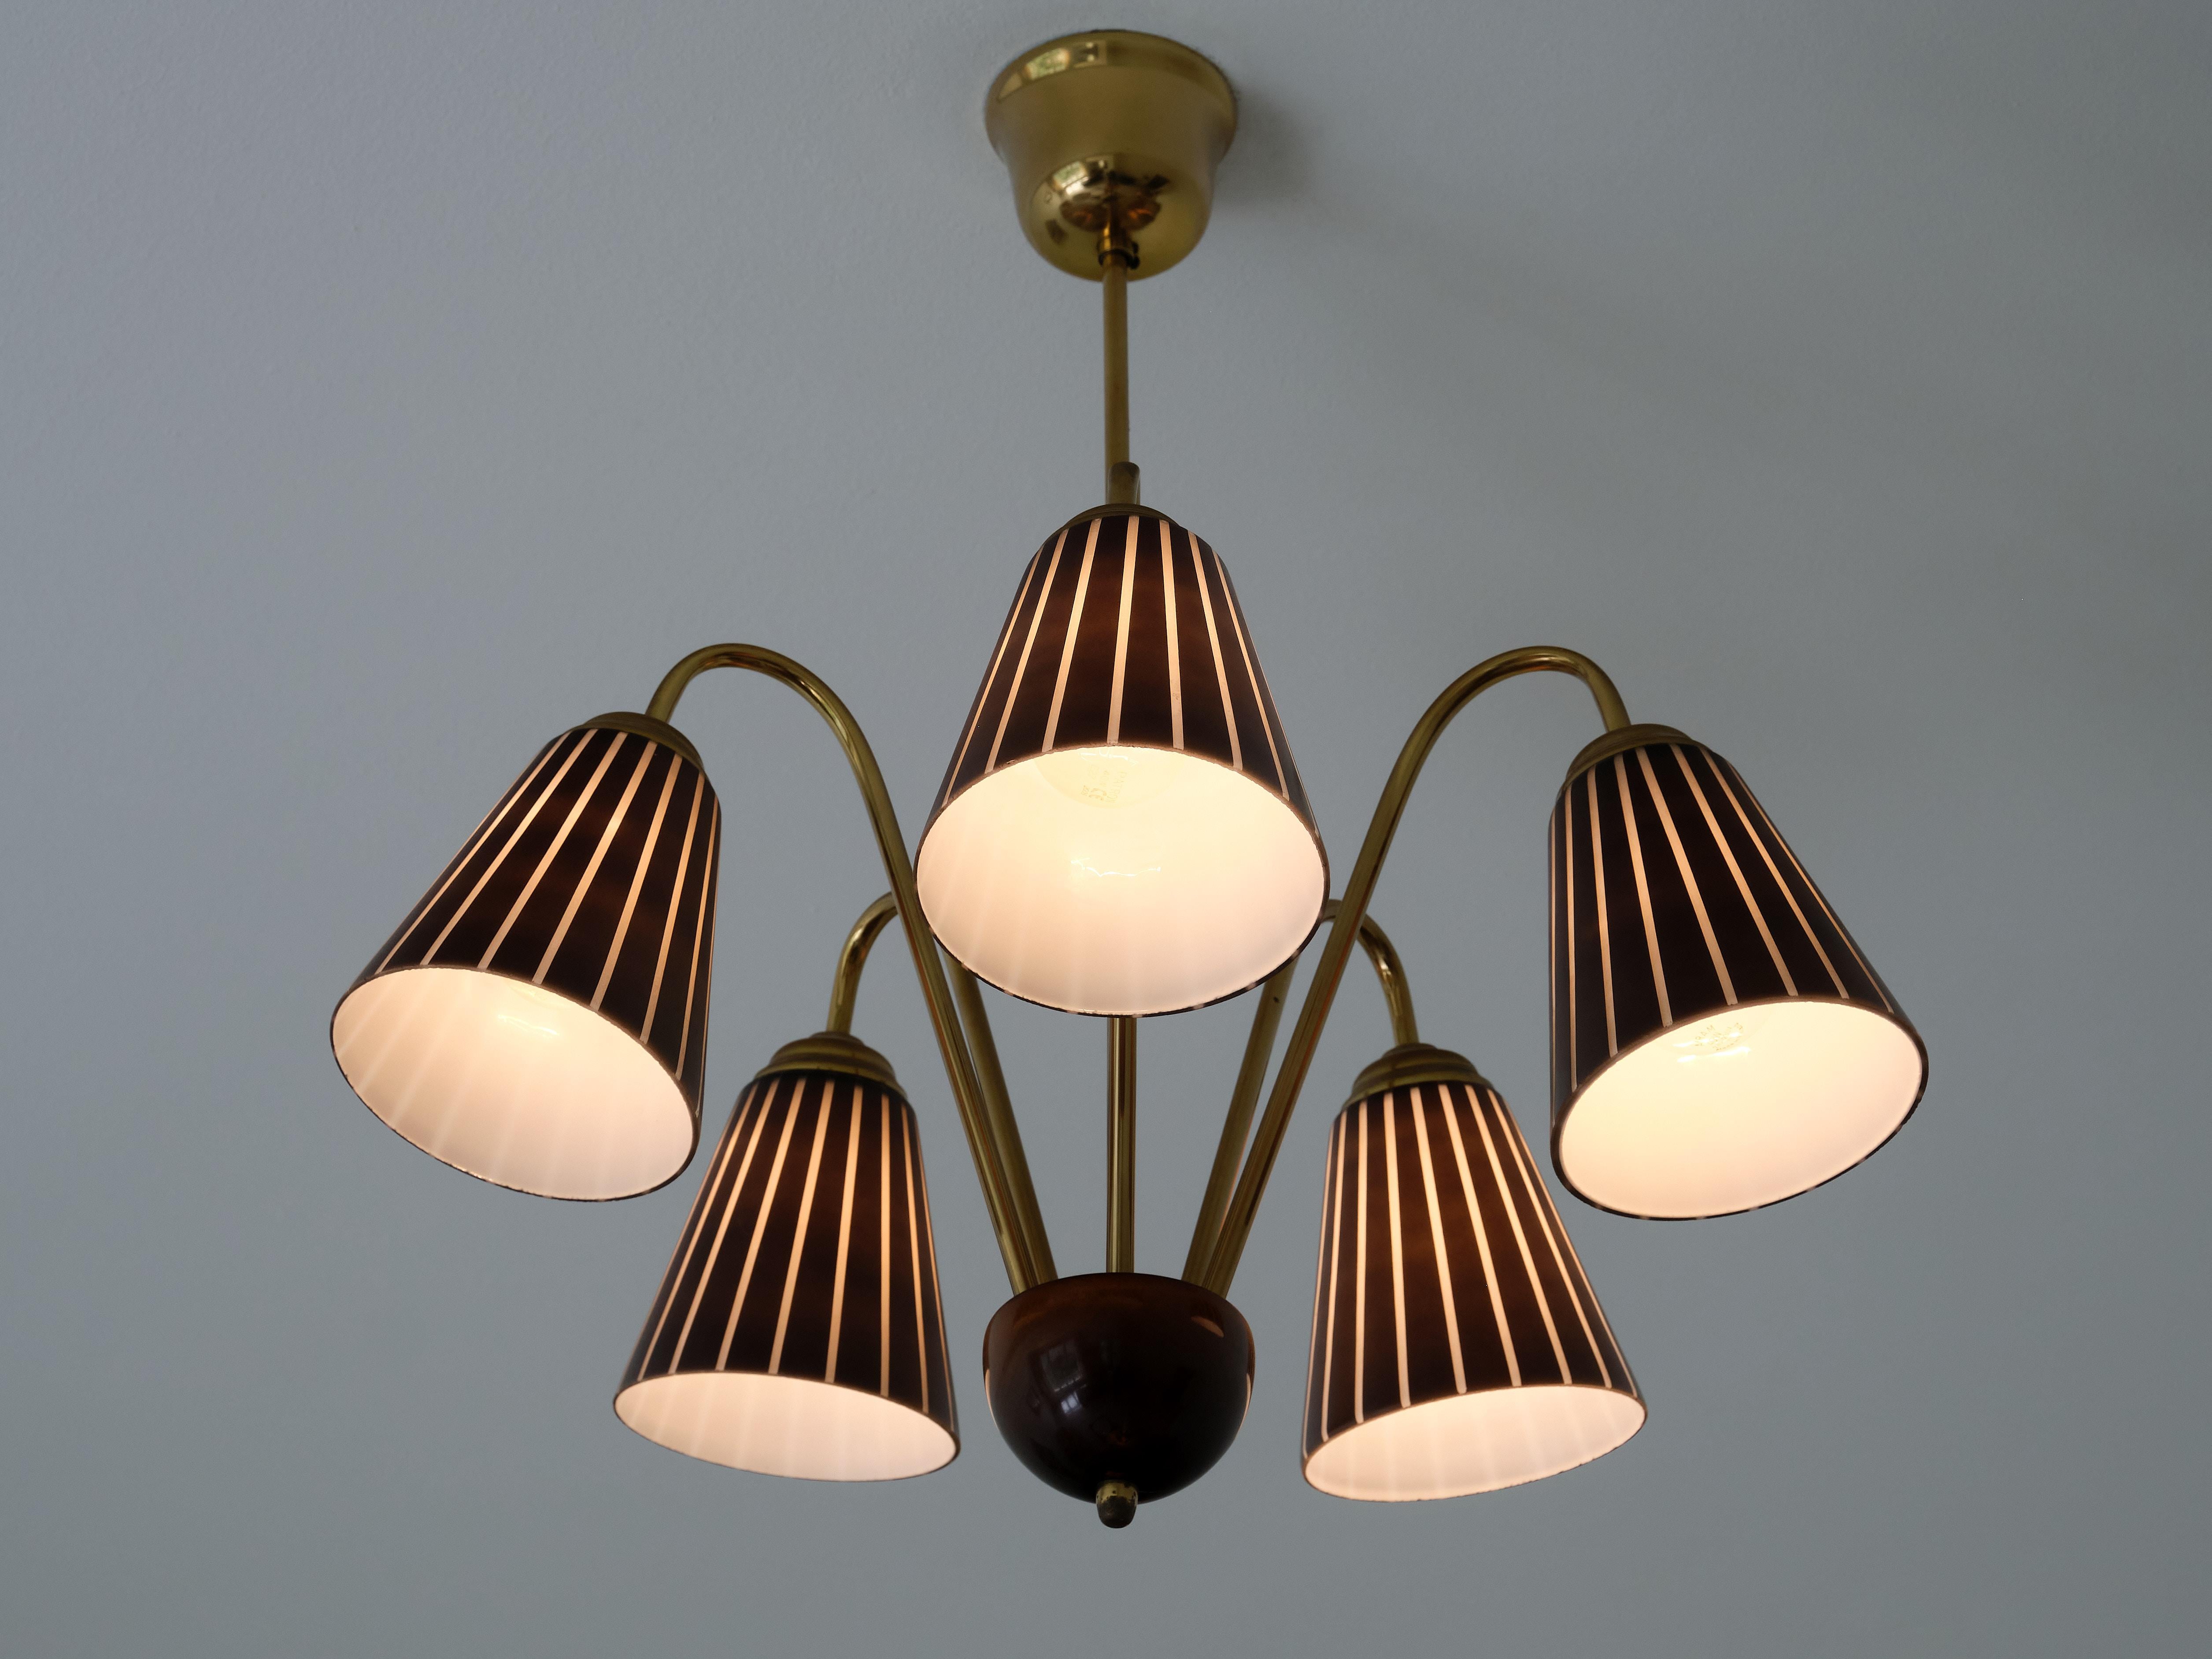 Nils Landberg Attributed Five Arm Chandelier in Striped Glass & Brass, Orrefors 3